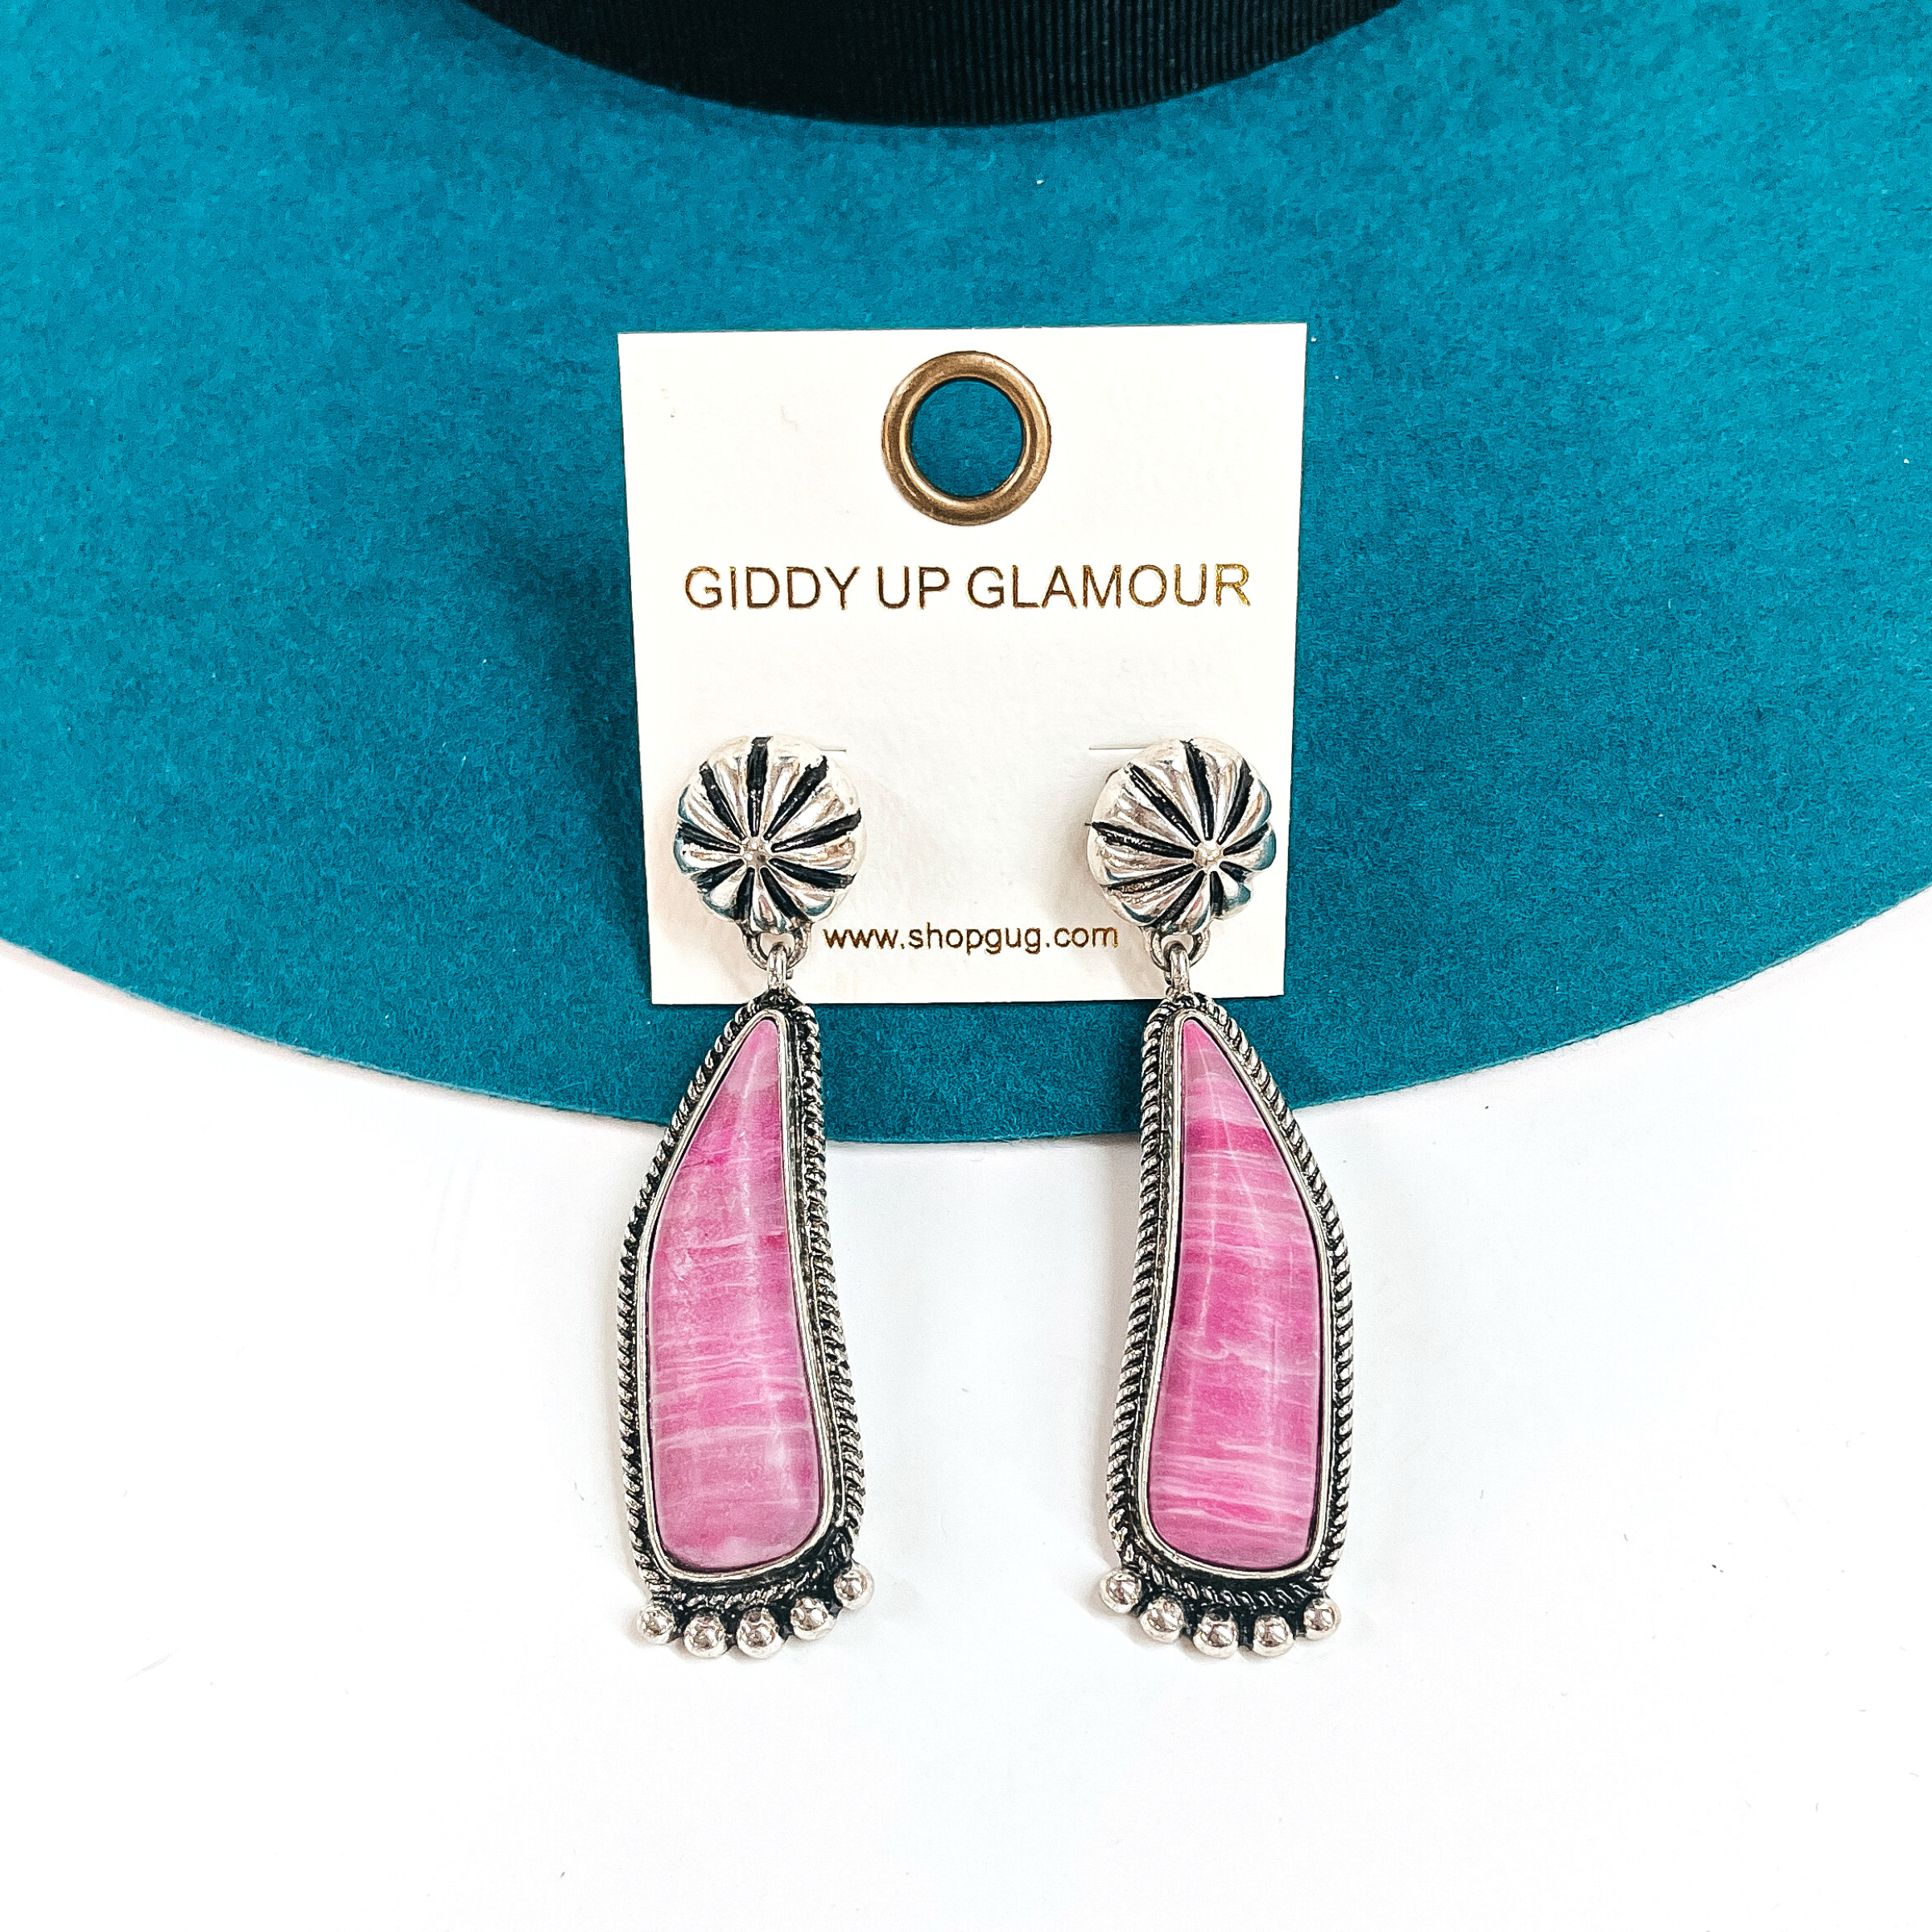 These are silver conch post earrings with a pink-marble stone drop earrings in a  silver setting. They have silver details in the bottom and they ae slightly curved.  These earrings are taken laying on a teal felt hat and on a white background.